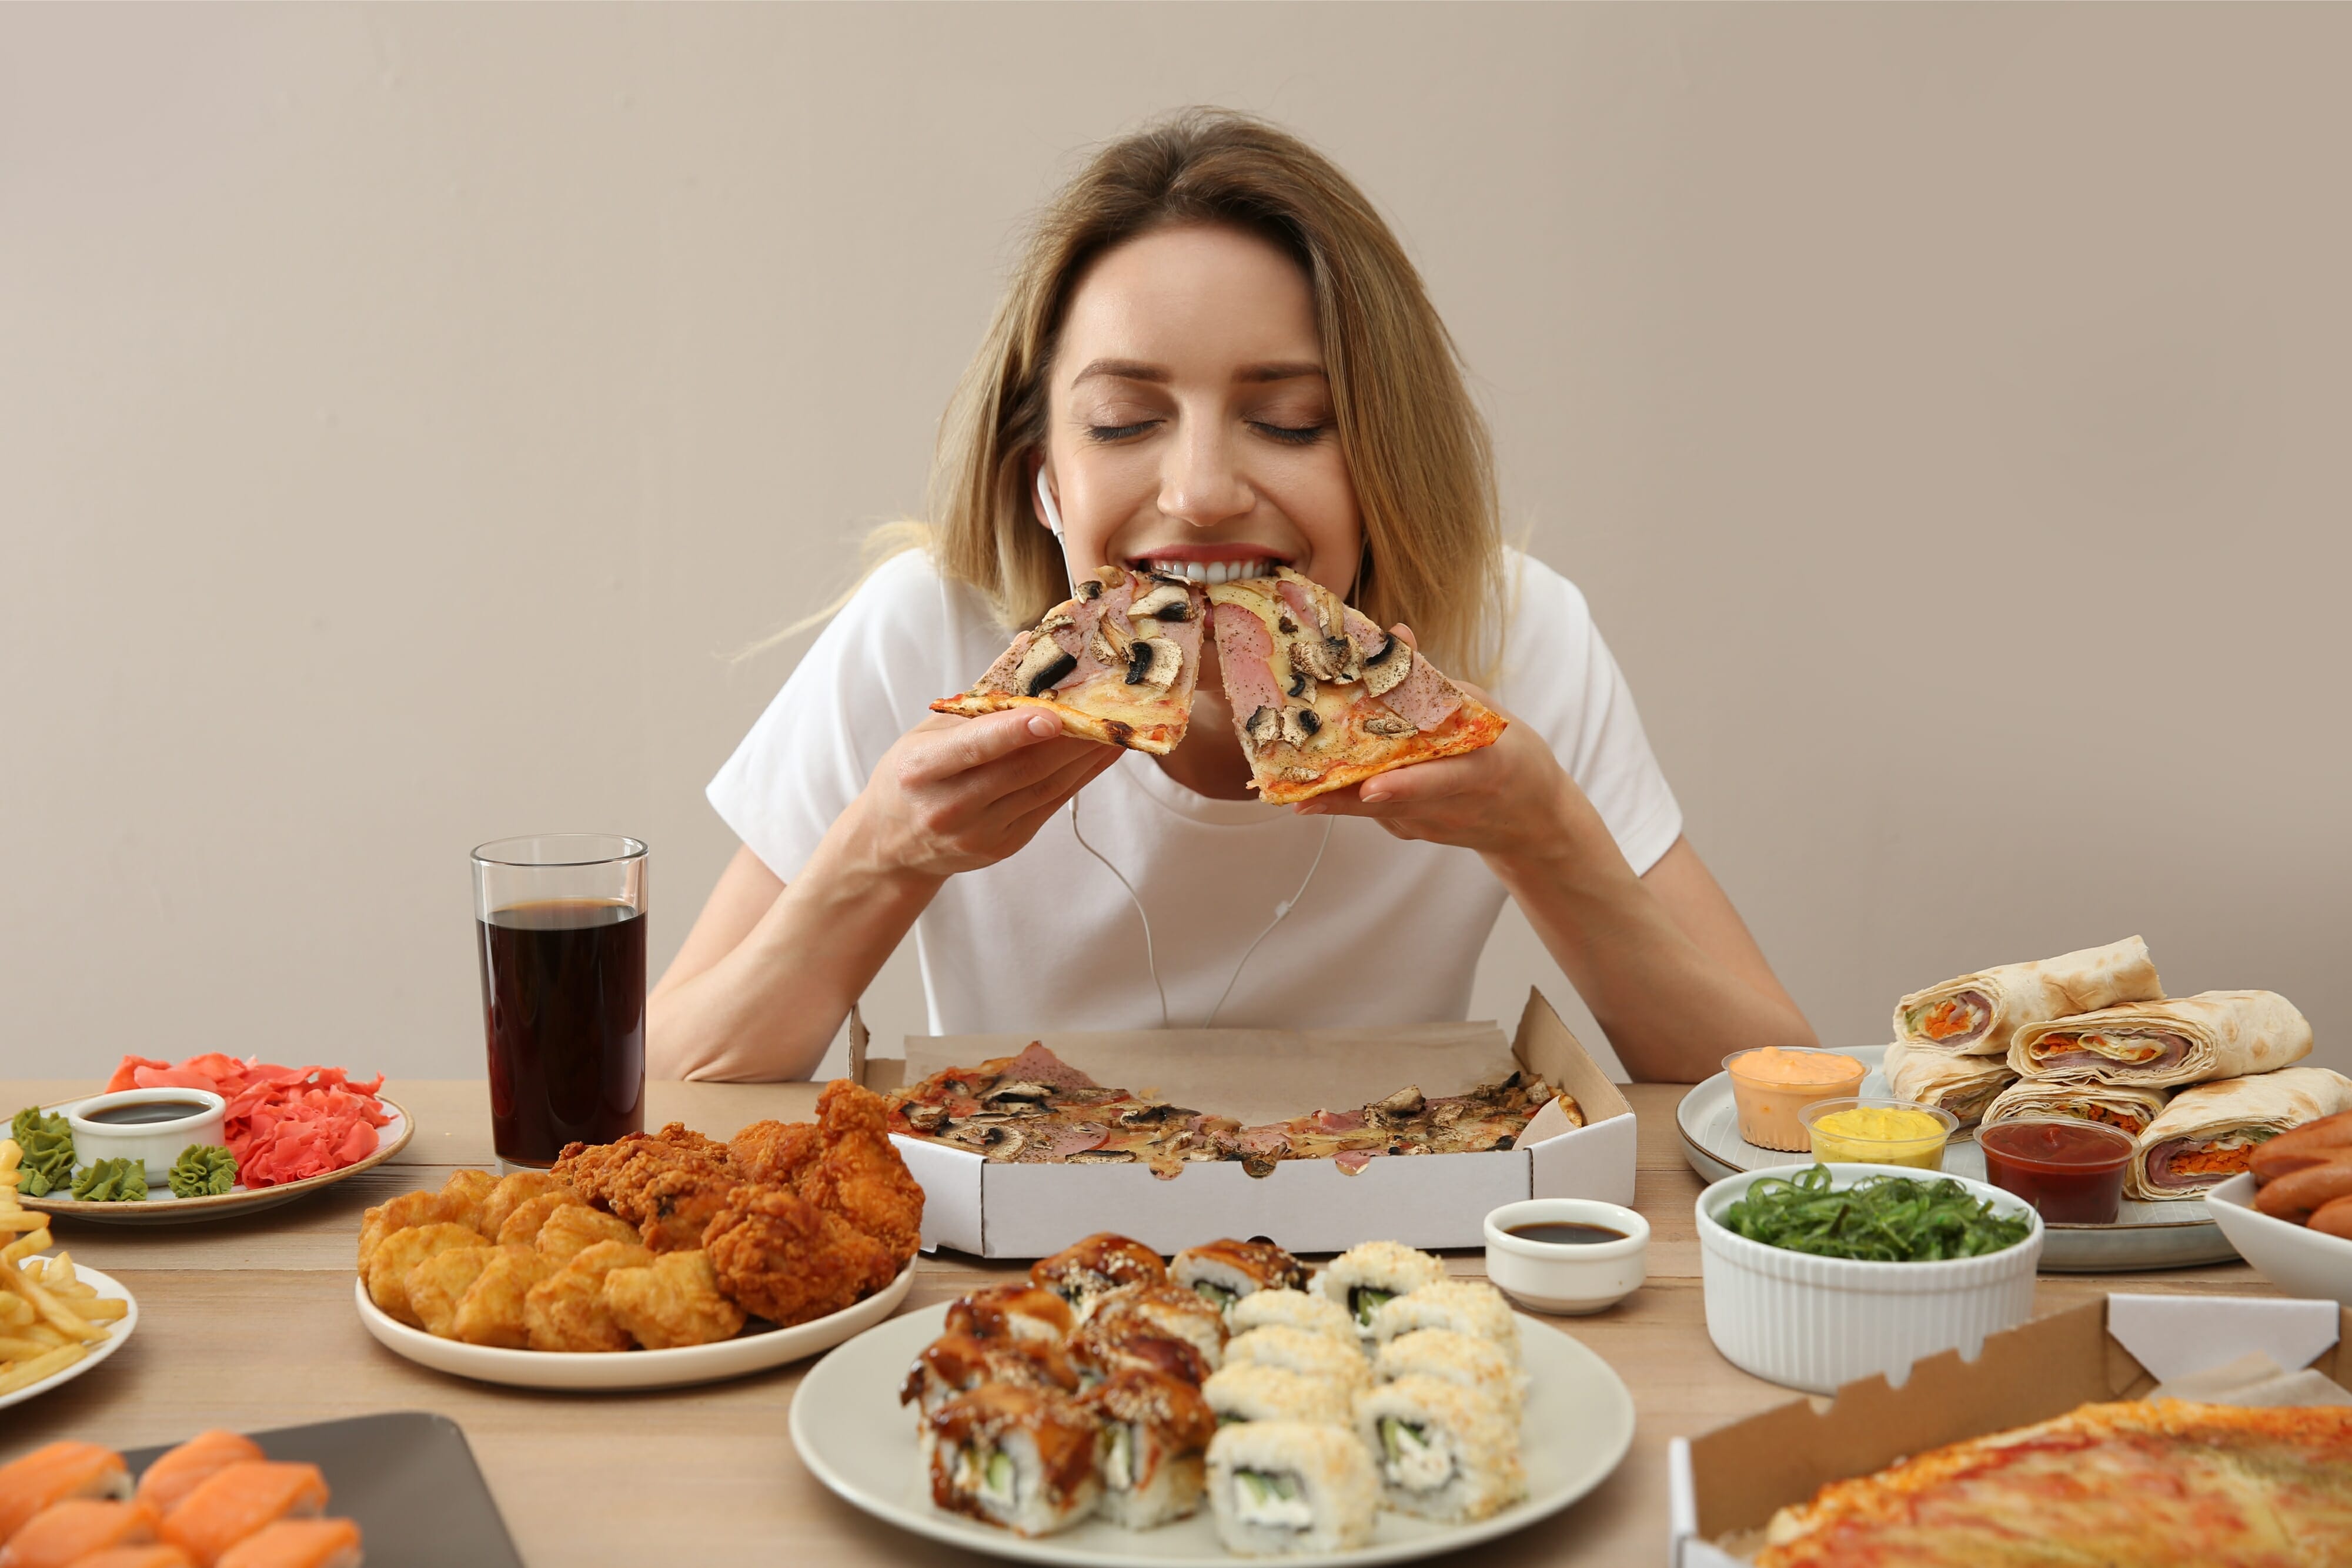 A woman is eating a lot of junk food at the table against a beige background